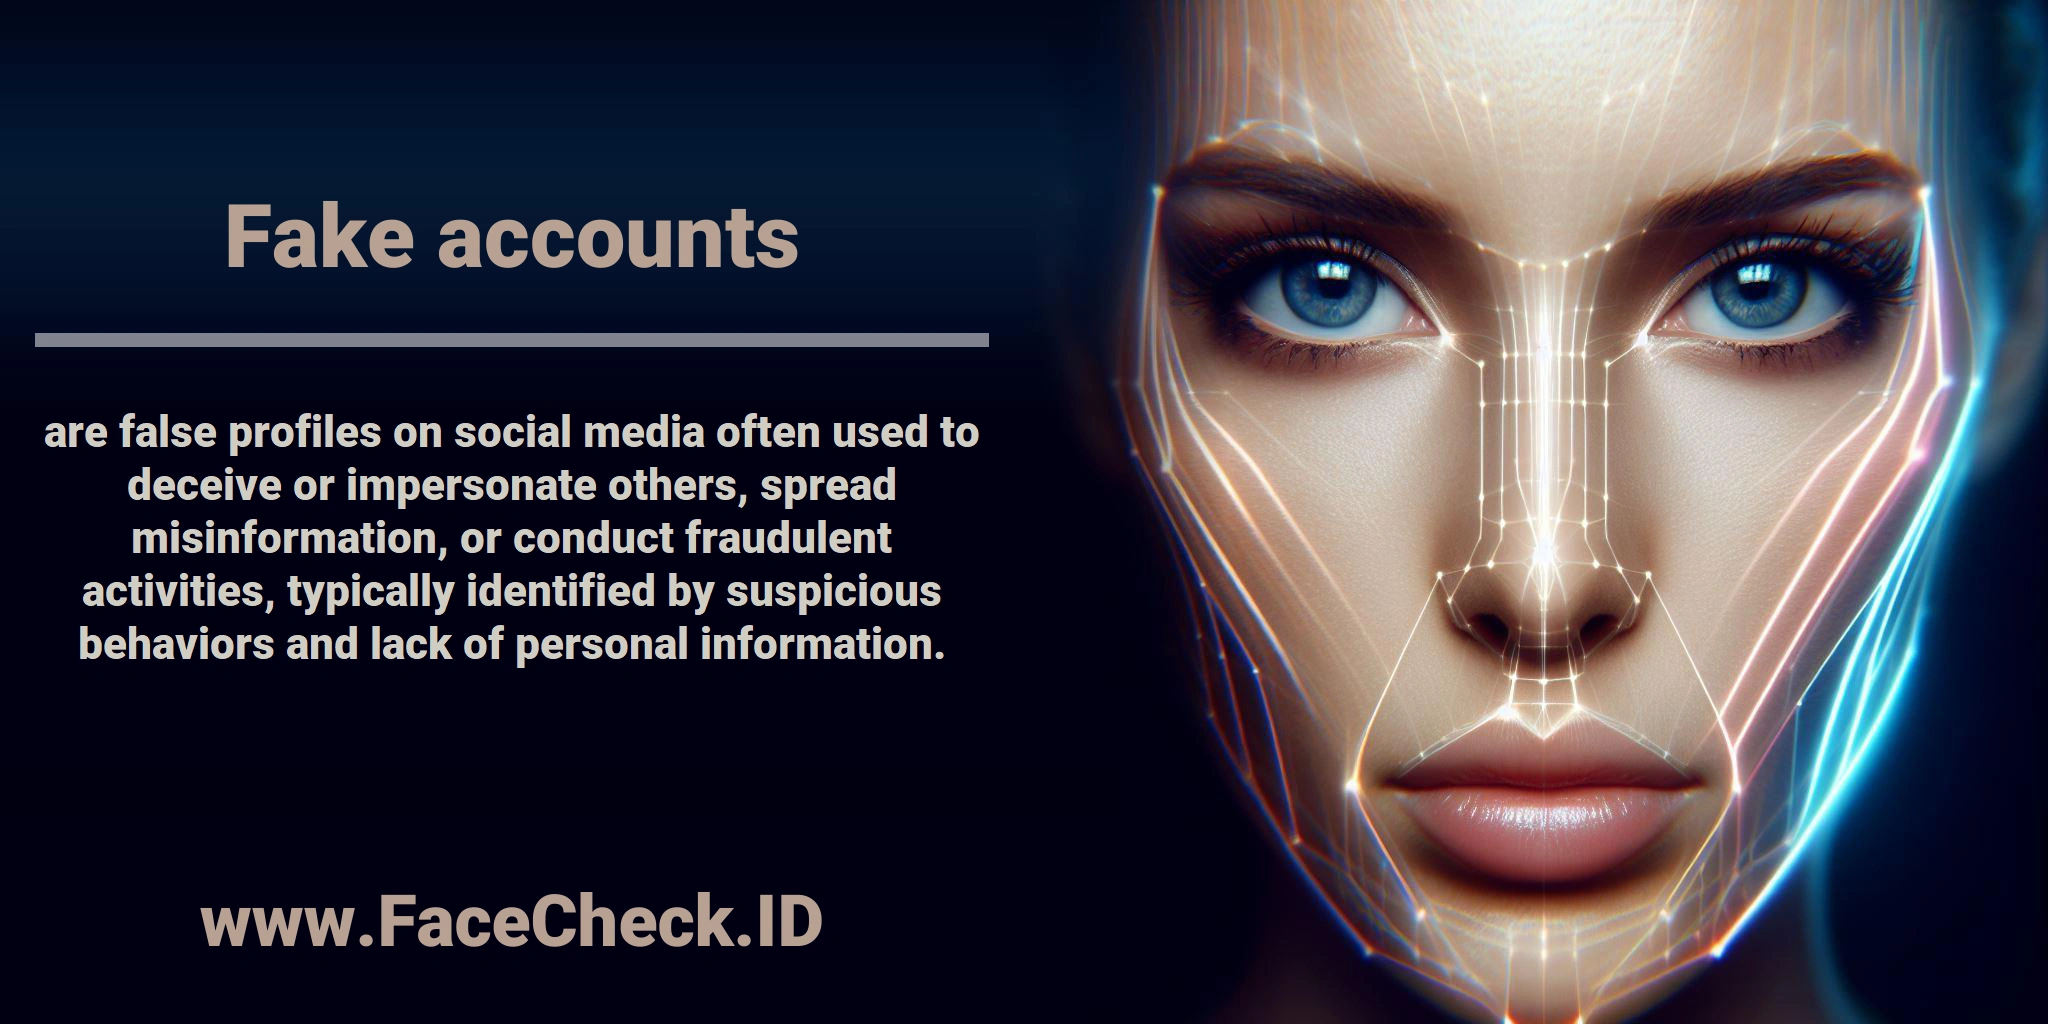 <b>Fake accounts</b> are false profiles on social media often used to deceive or impersonate others, spread misinformation, or conduct fraudulent activities, typically identified by suspicious behaviors and lack of personal information.